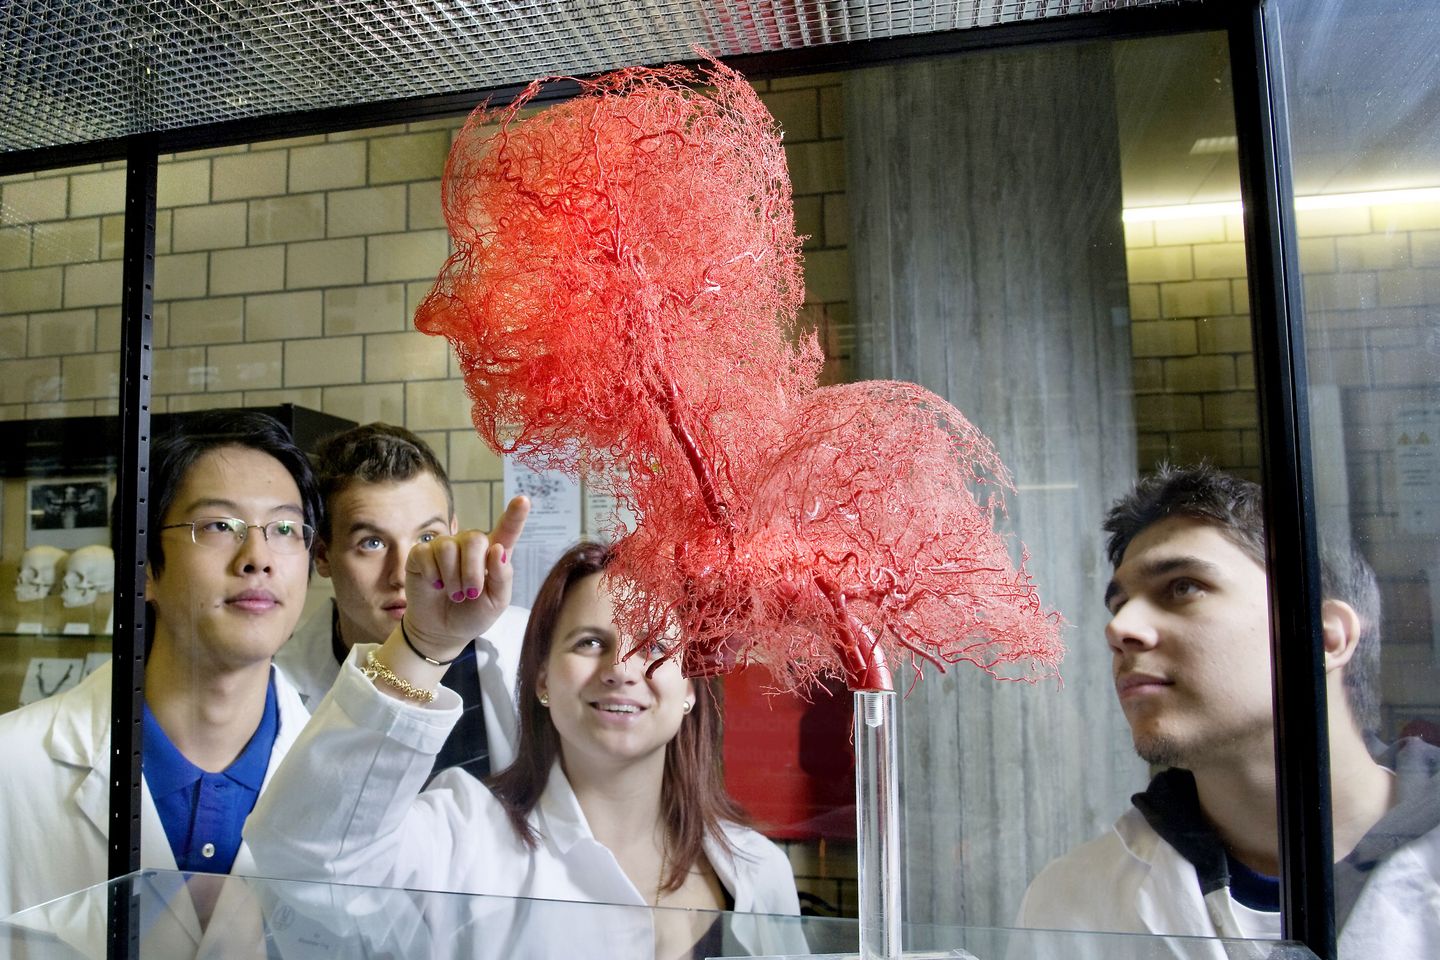 Four students from the Faculty of Medicine stand around a vitrine-like display shelf looking at an installation of a human head formed exclusively from the blood vessels found in the human body.